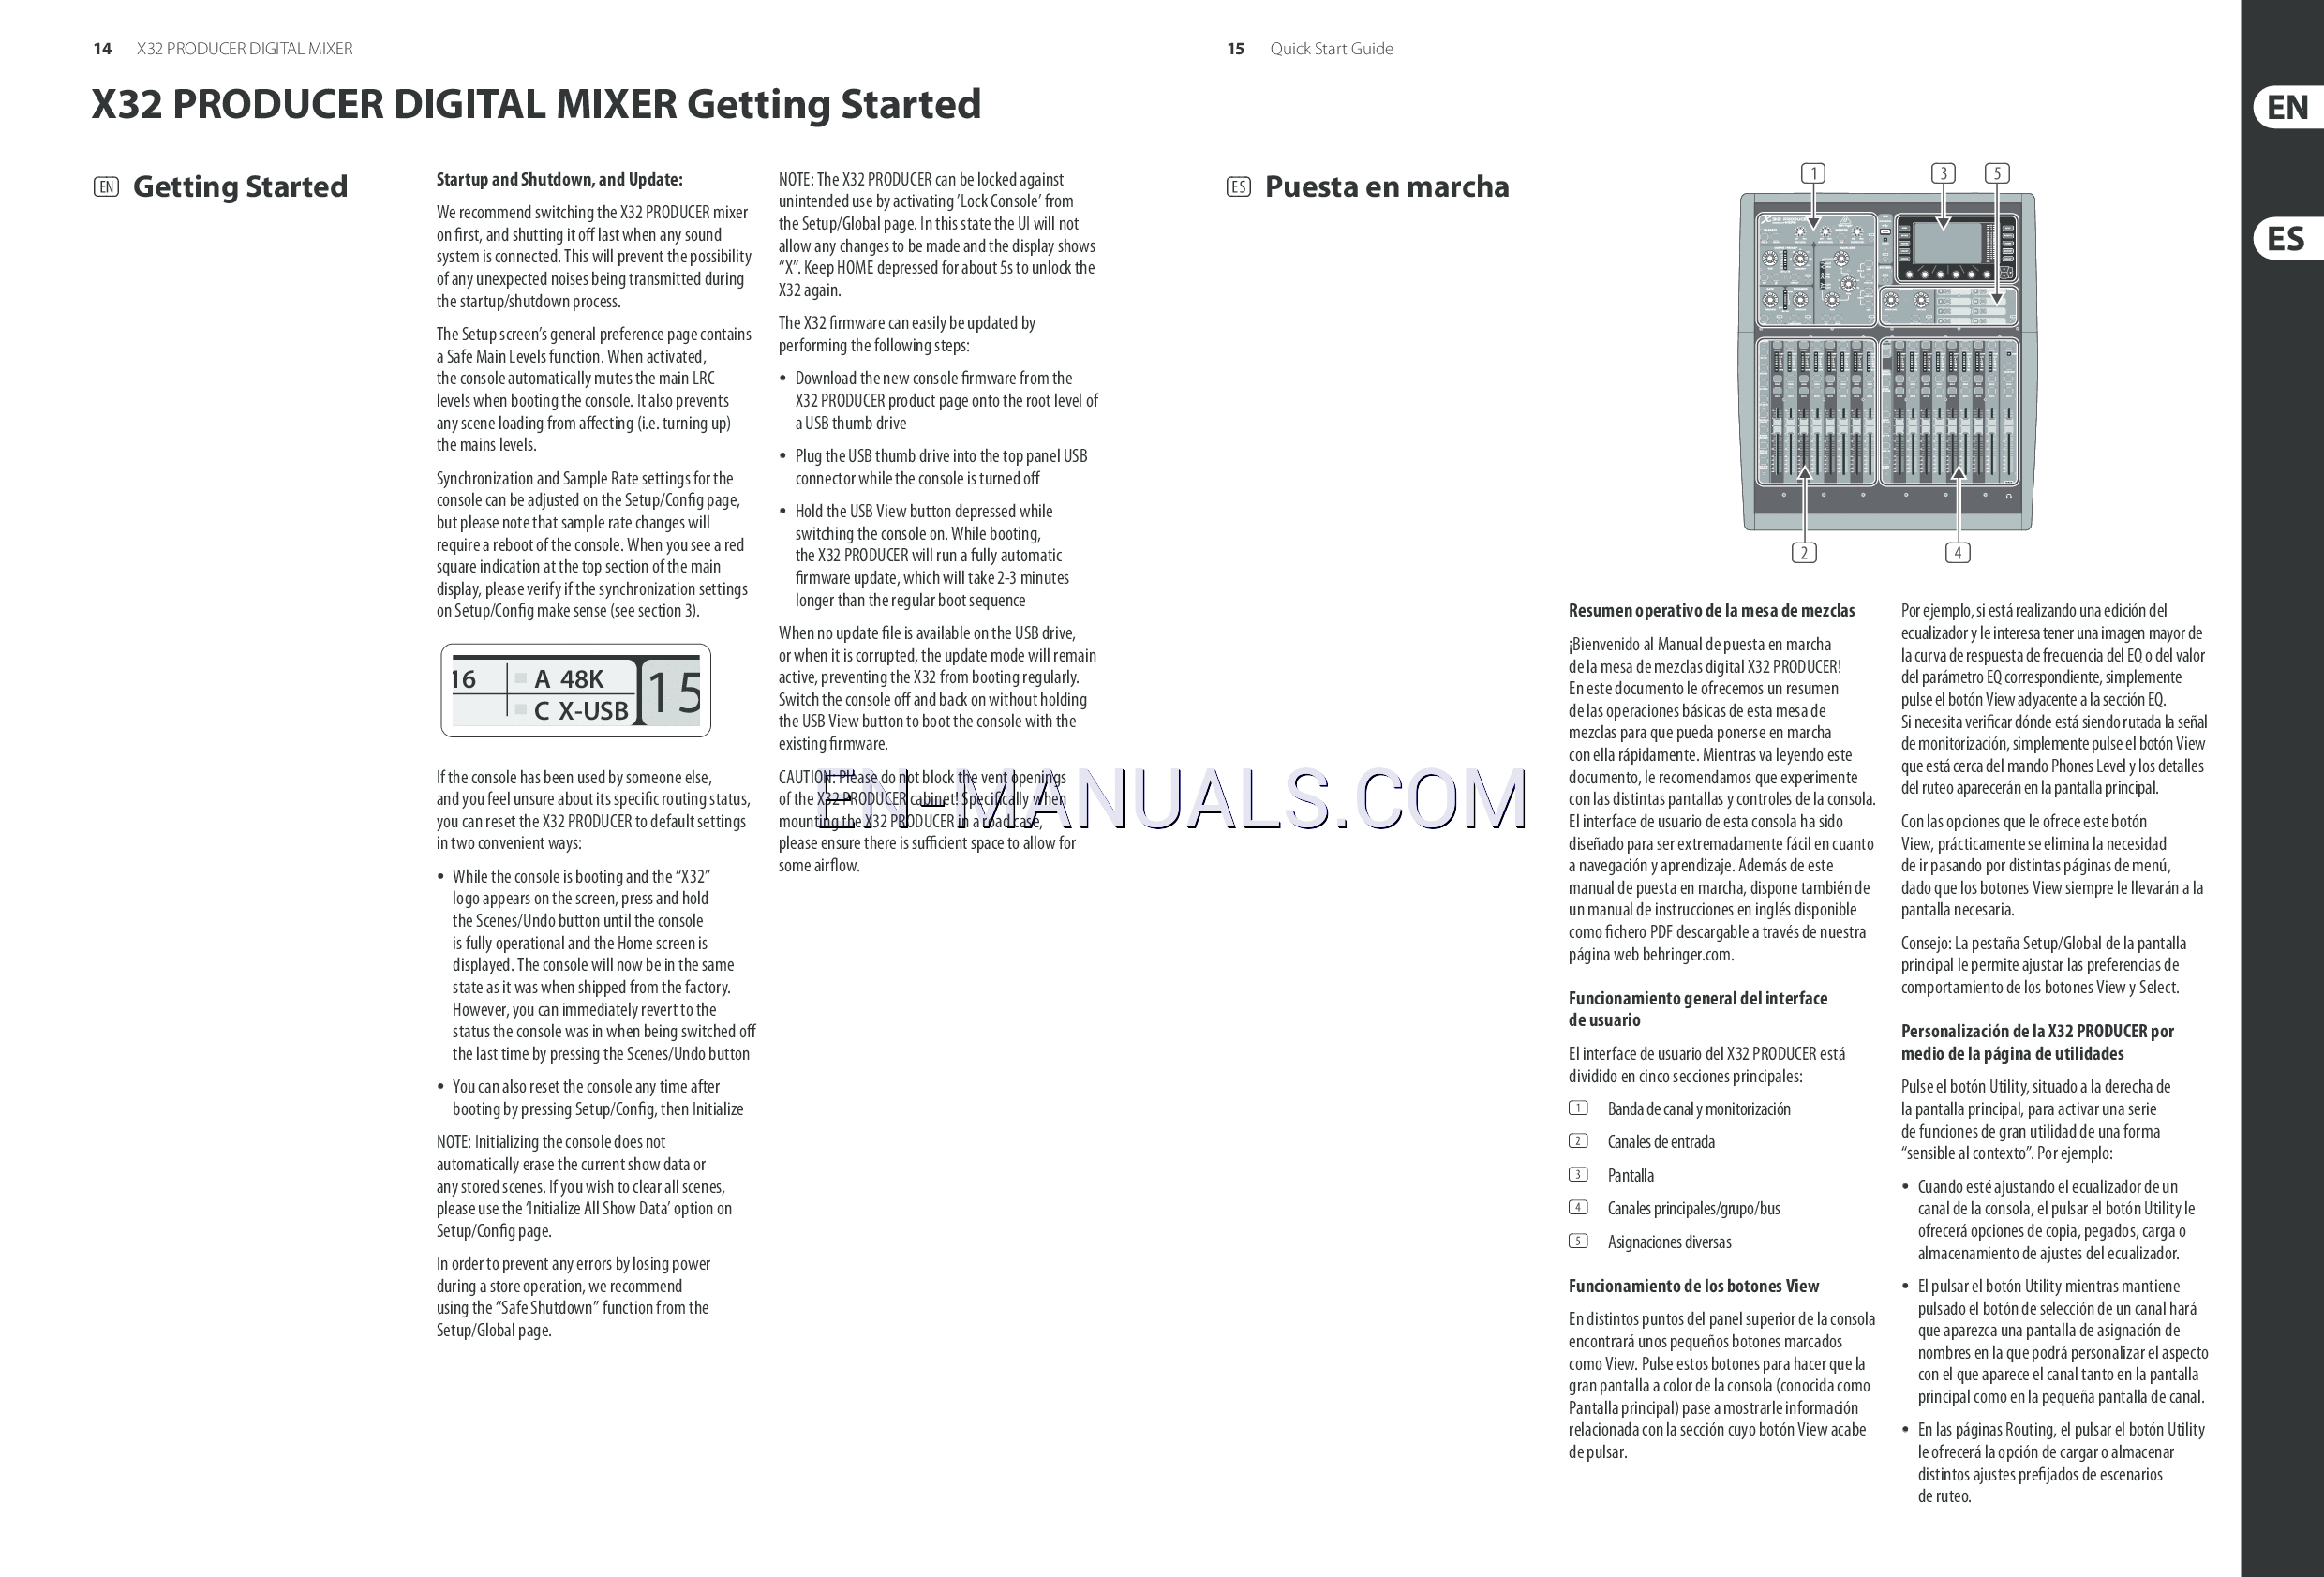 Quick Start Guide for Mixers Behringer X32 PRODUCER, download free